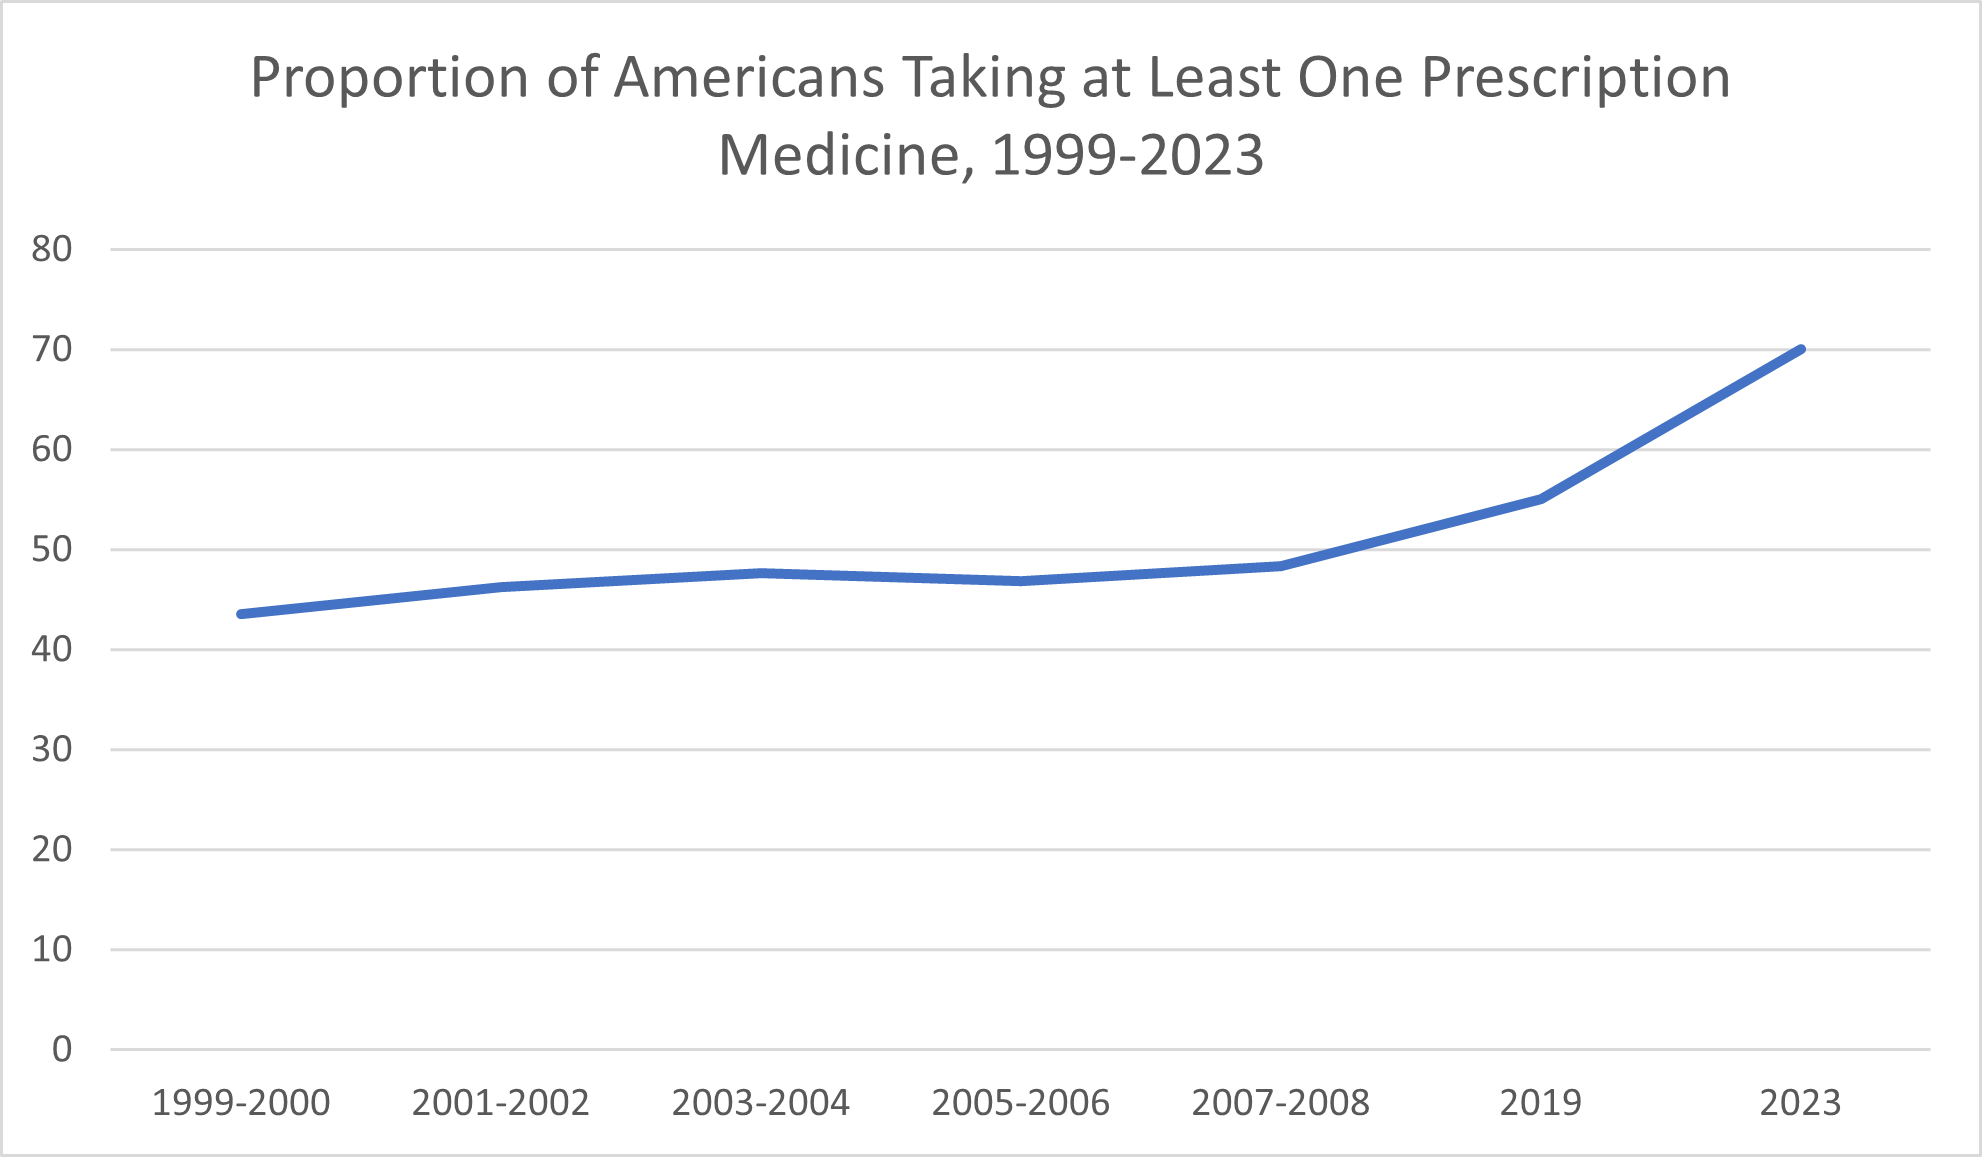 Proportion of Americans Taking at Least One Prescription Medicine, 1999-2023